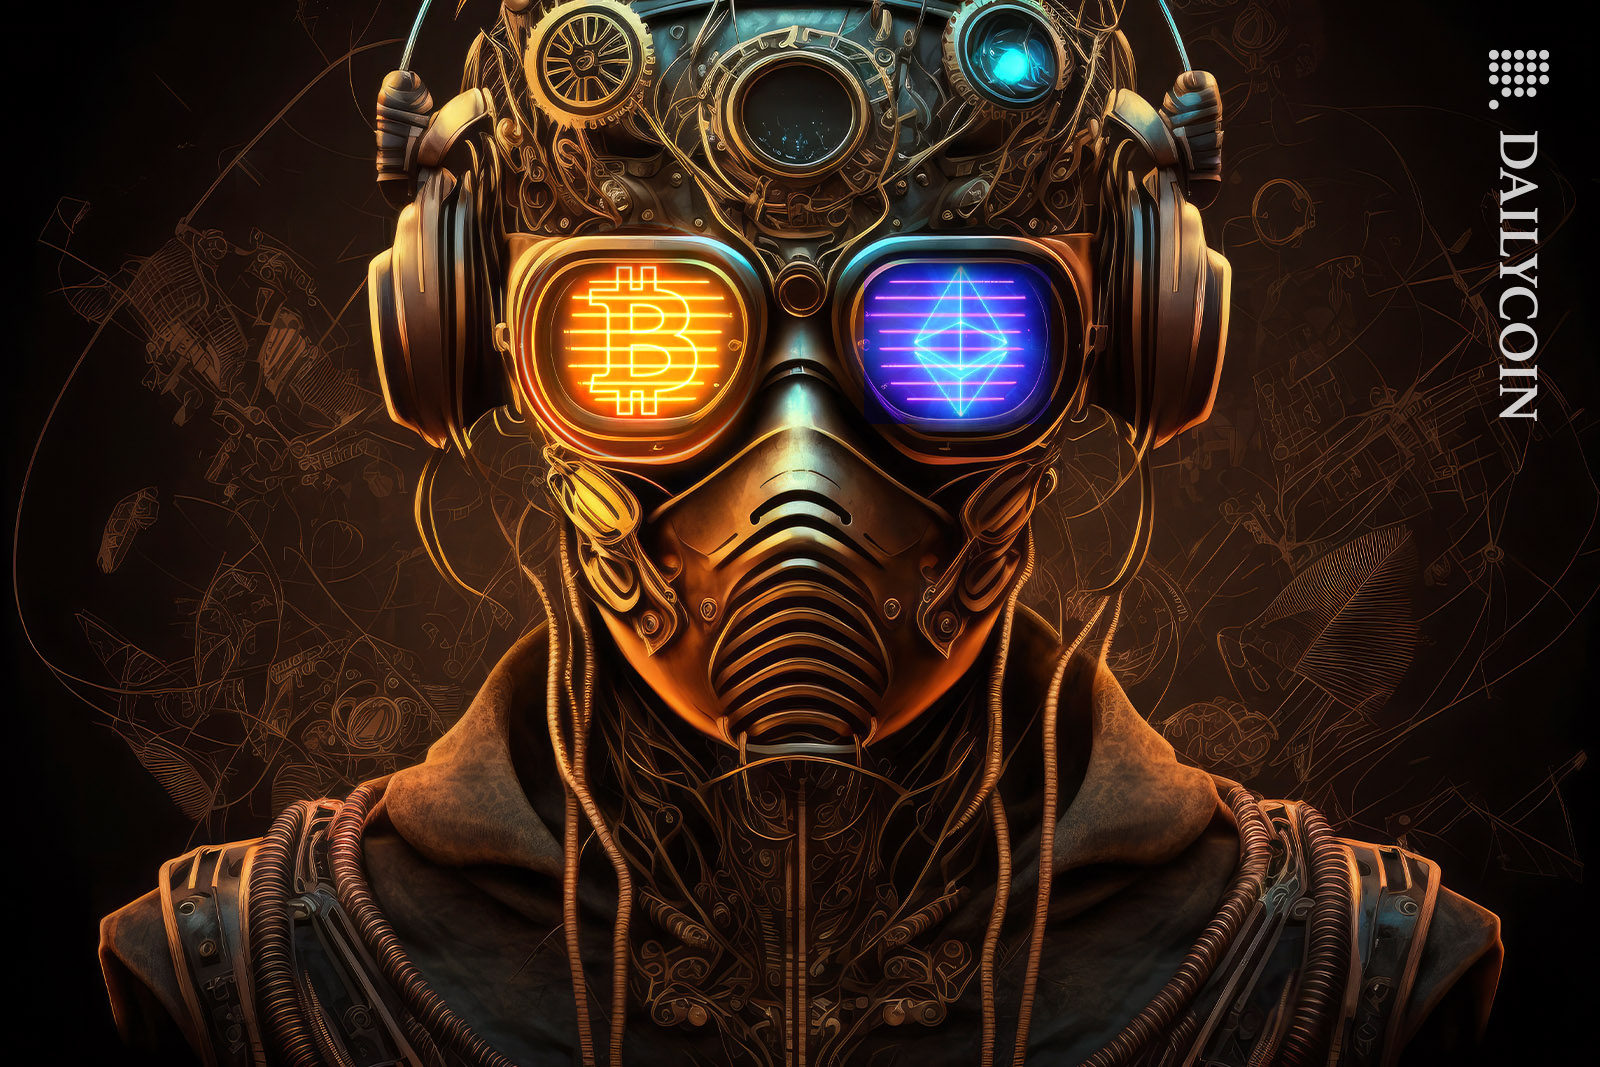 Futuristic steam punk gas mask with glasses one eye is ETH and BTC.